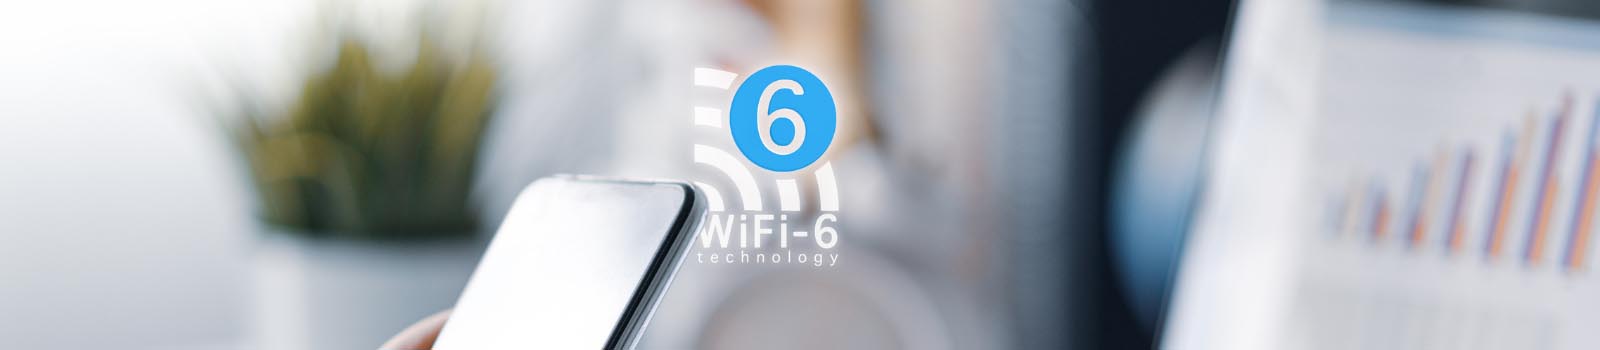 an introduction to Wi Fi 6